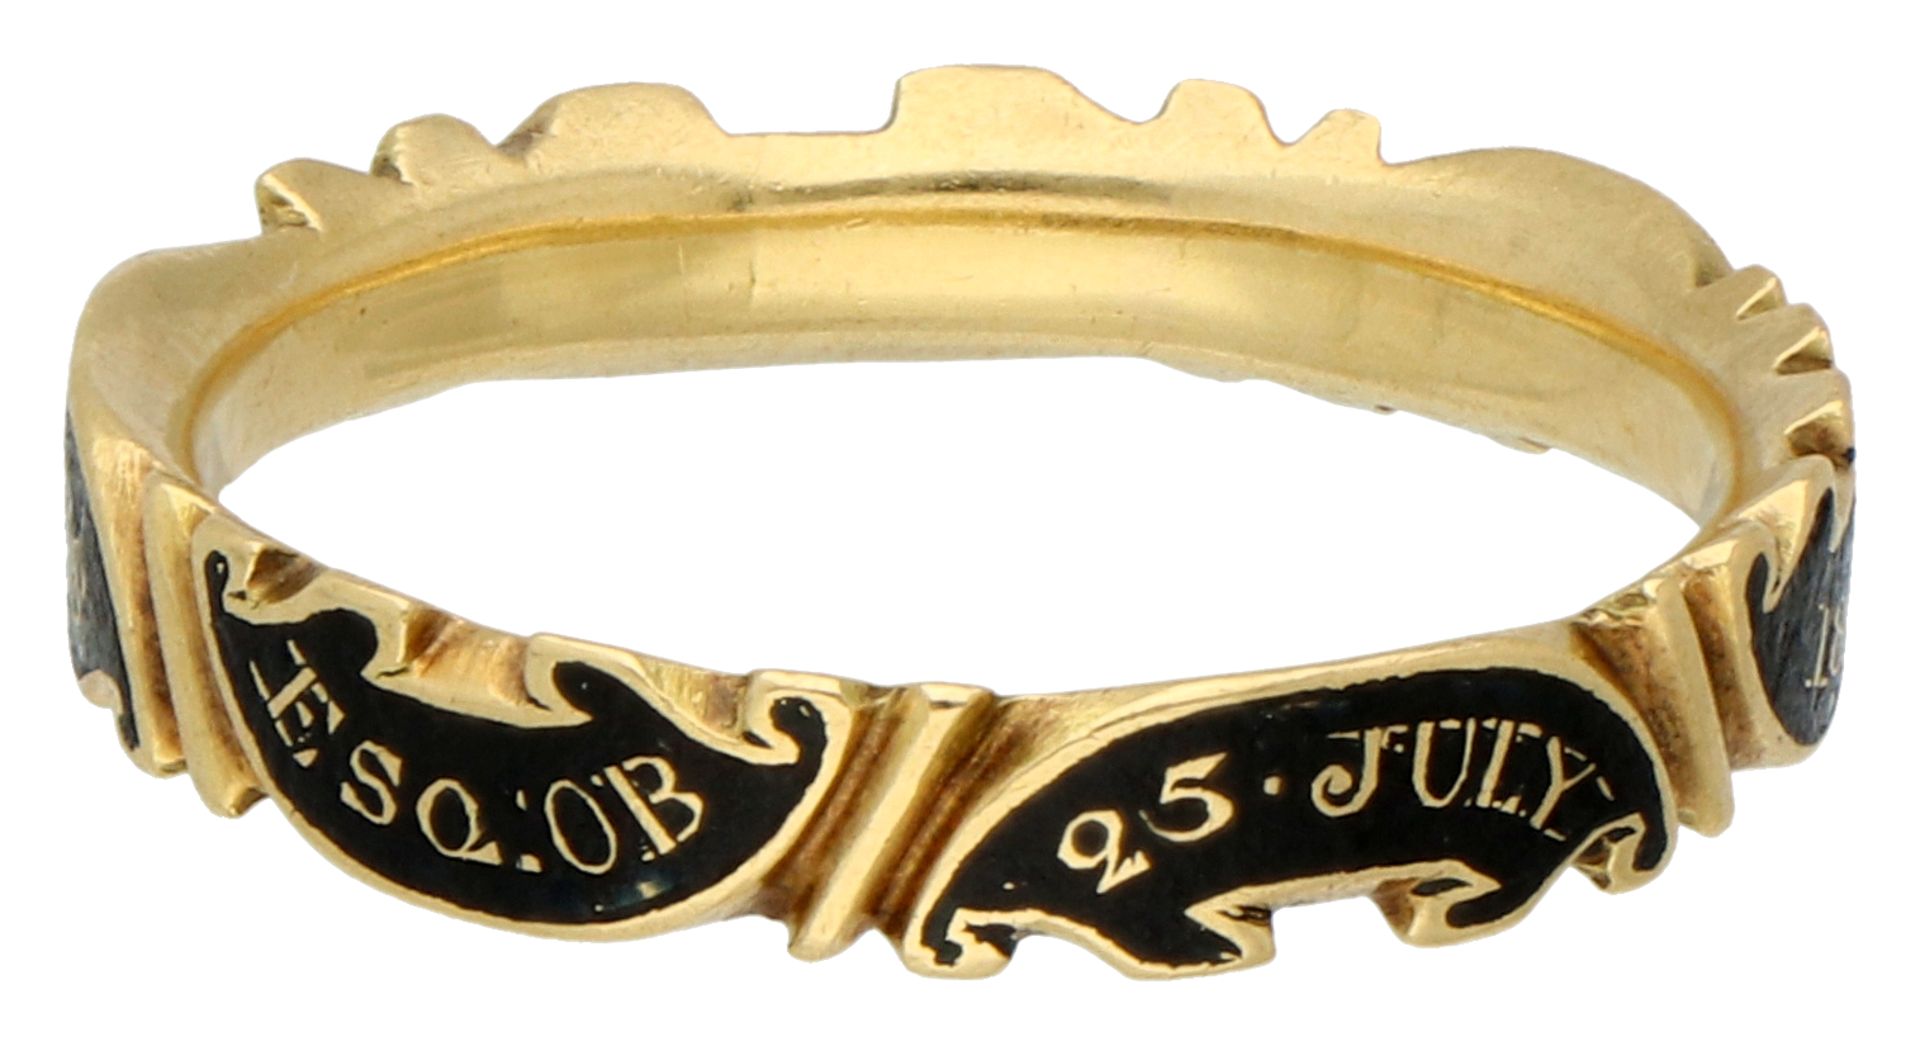 No Reserve - English antique 18K yellow gold memorial ring from 1825. - Image 2 of 4